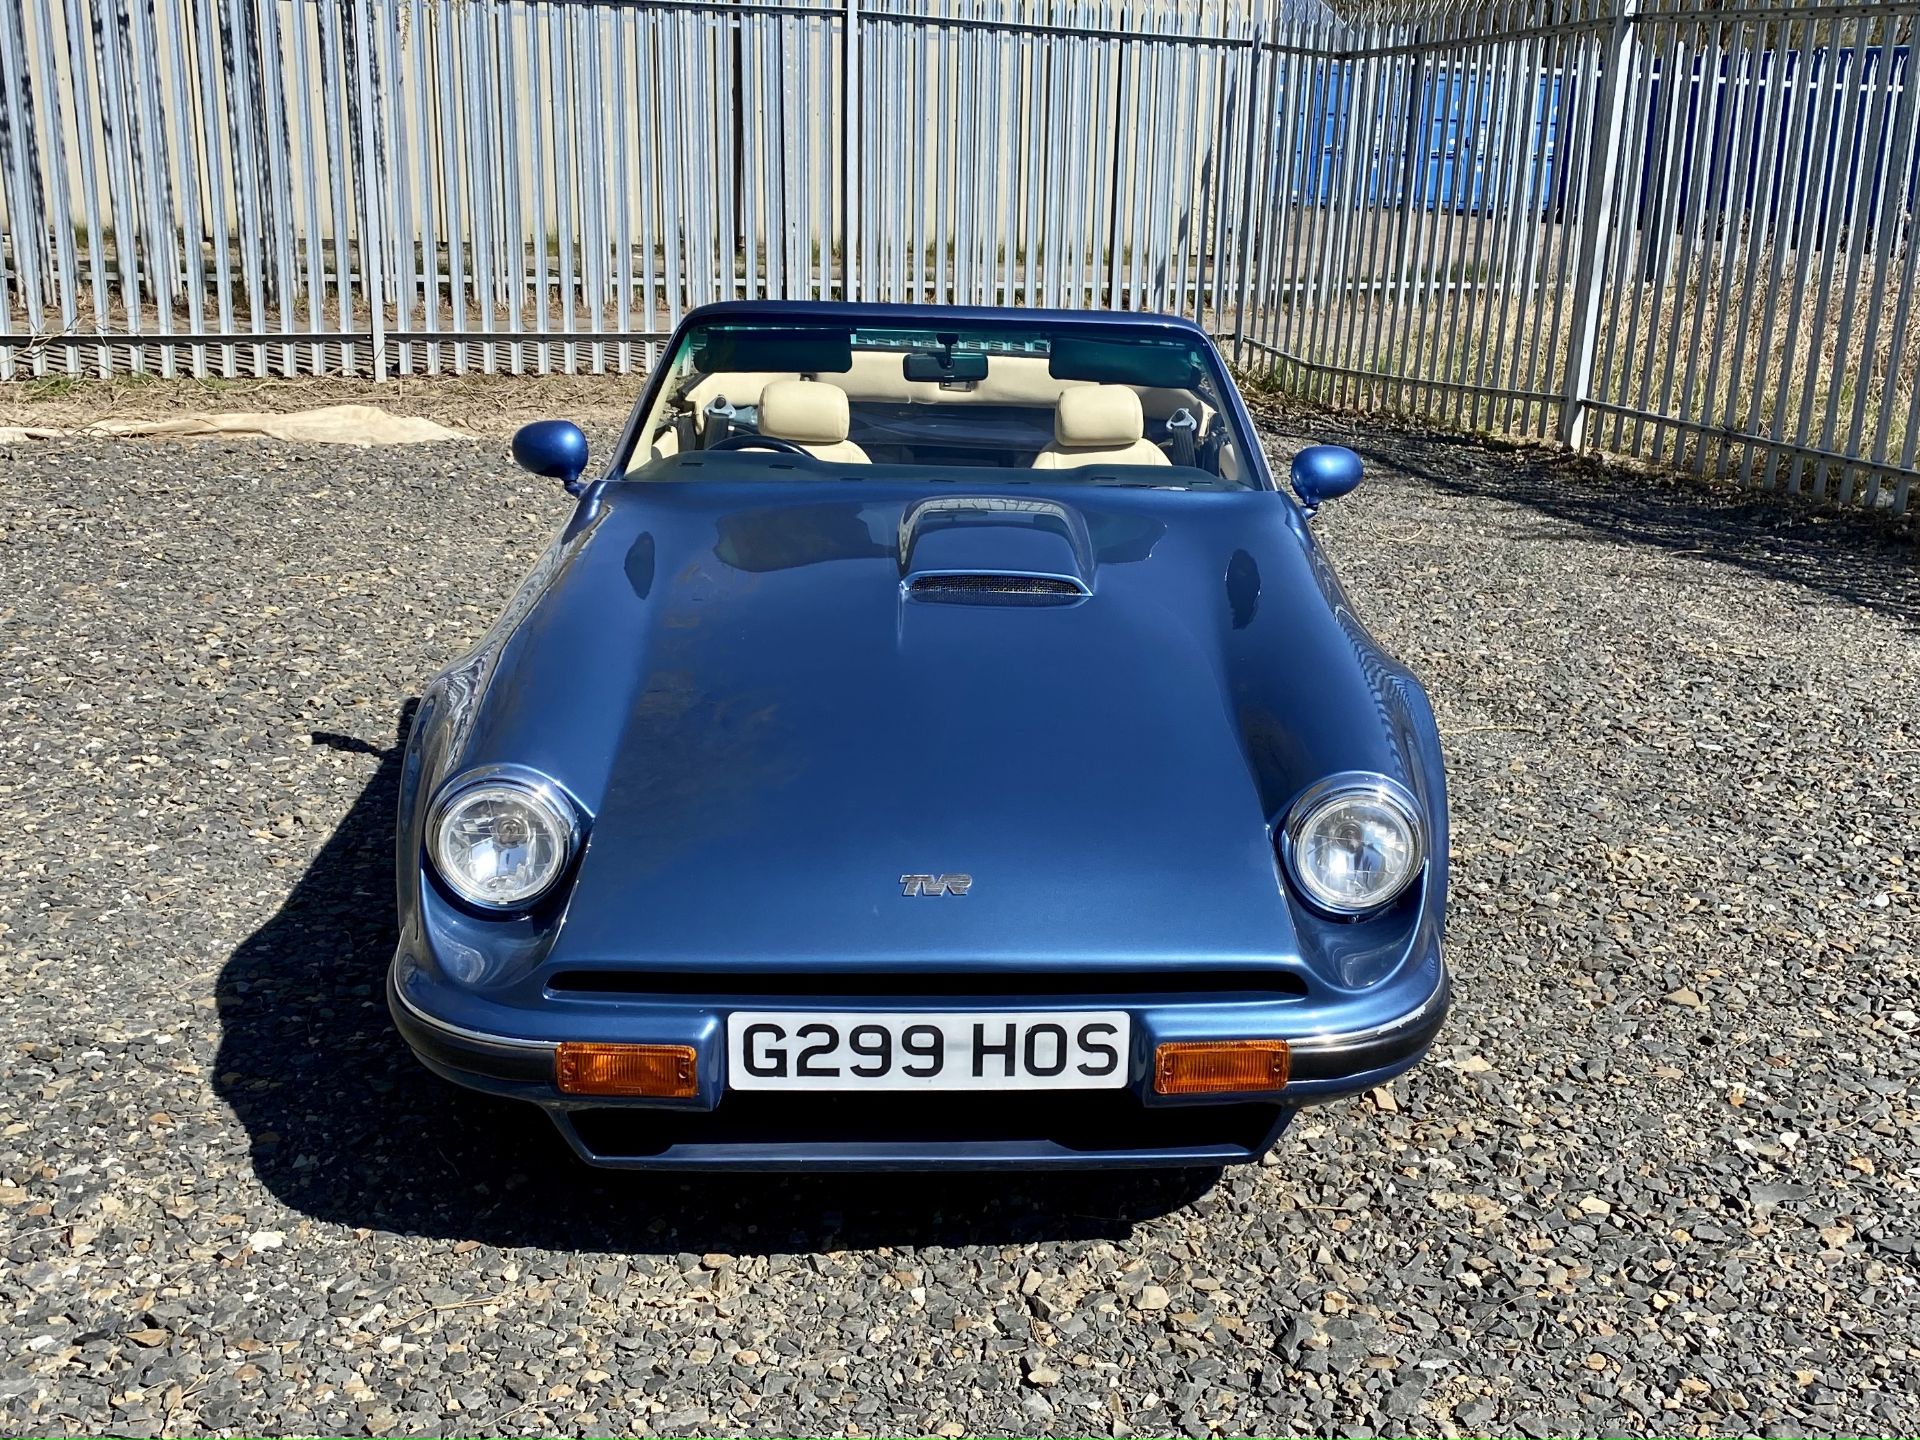 TVR S2 - Image 14 of 60